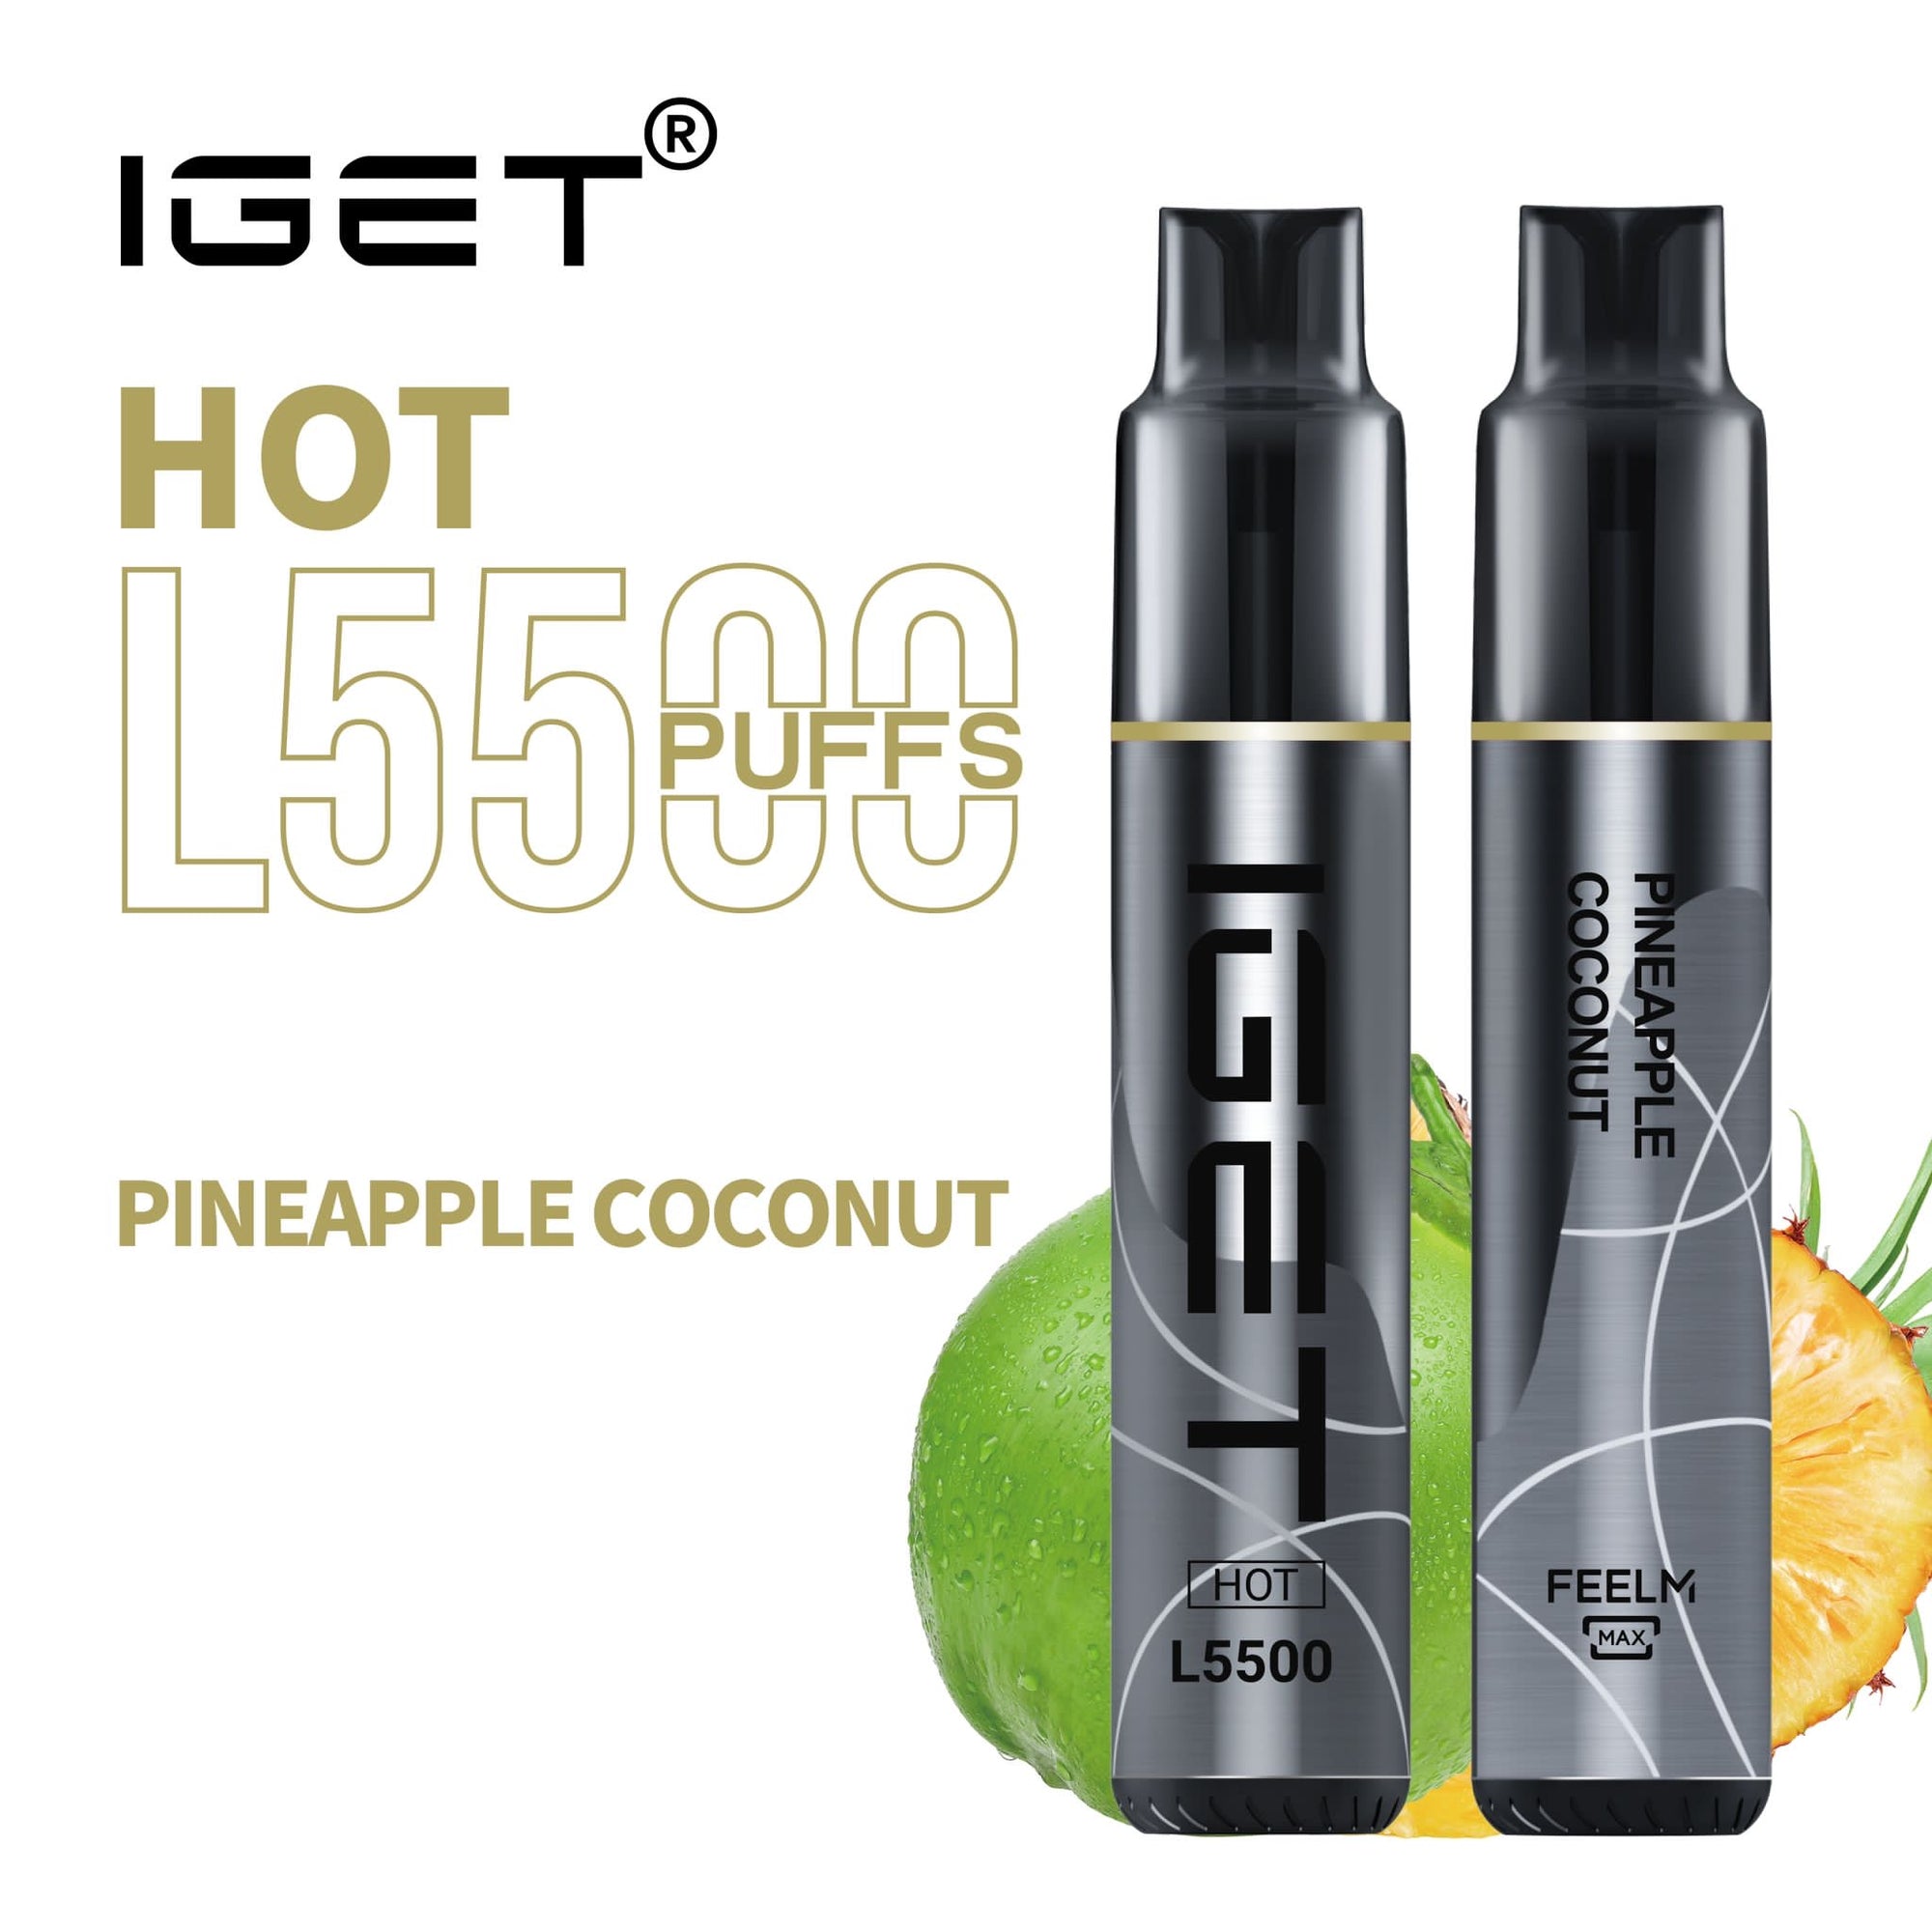 IGET HOT PINEAPPLE COCONUT 5500 PUFFS